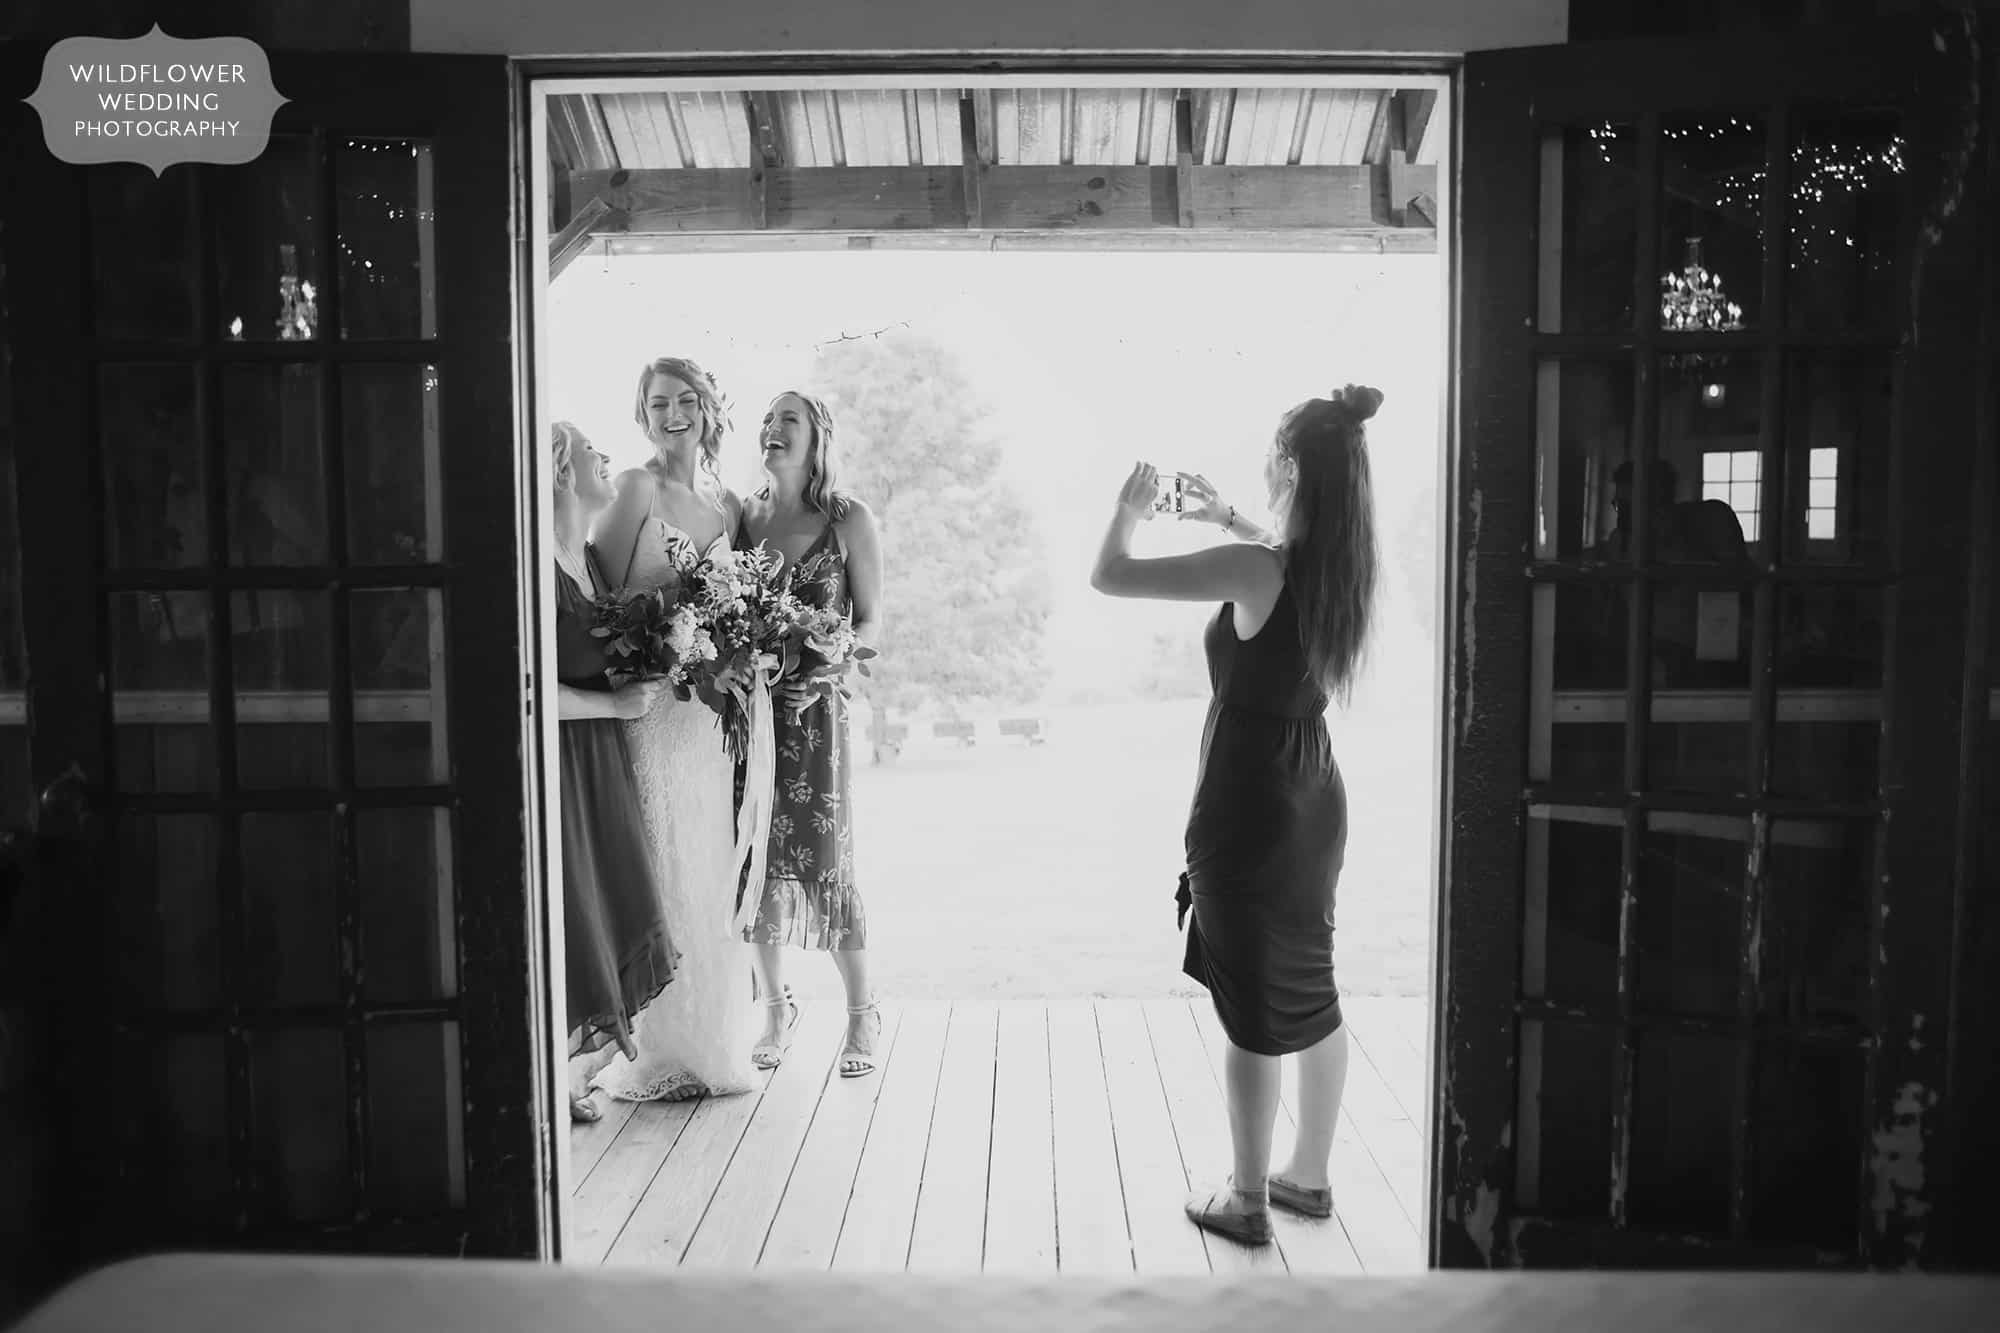 The bride laughs with friends on the porch during a rainy wedding at the Weston Red Barn Farm.